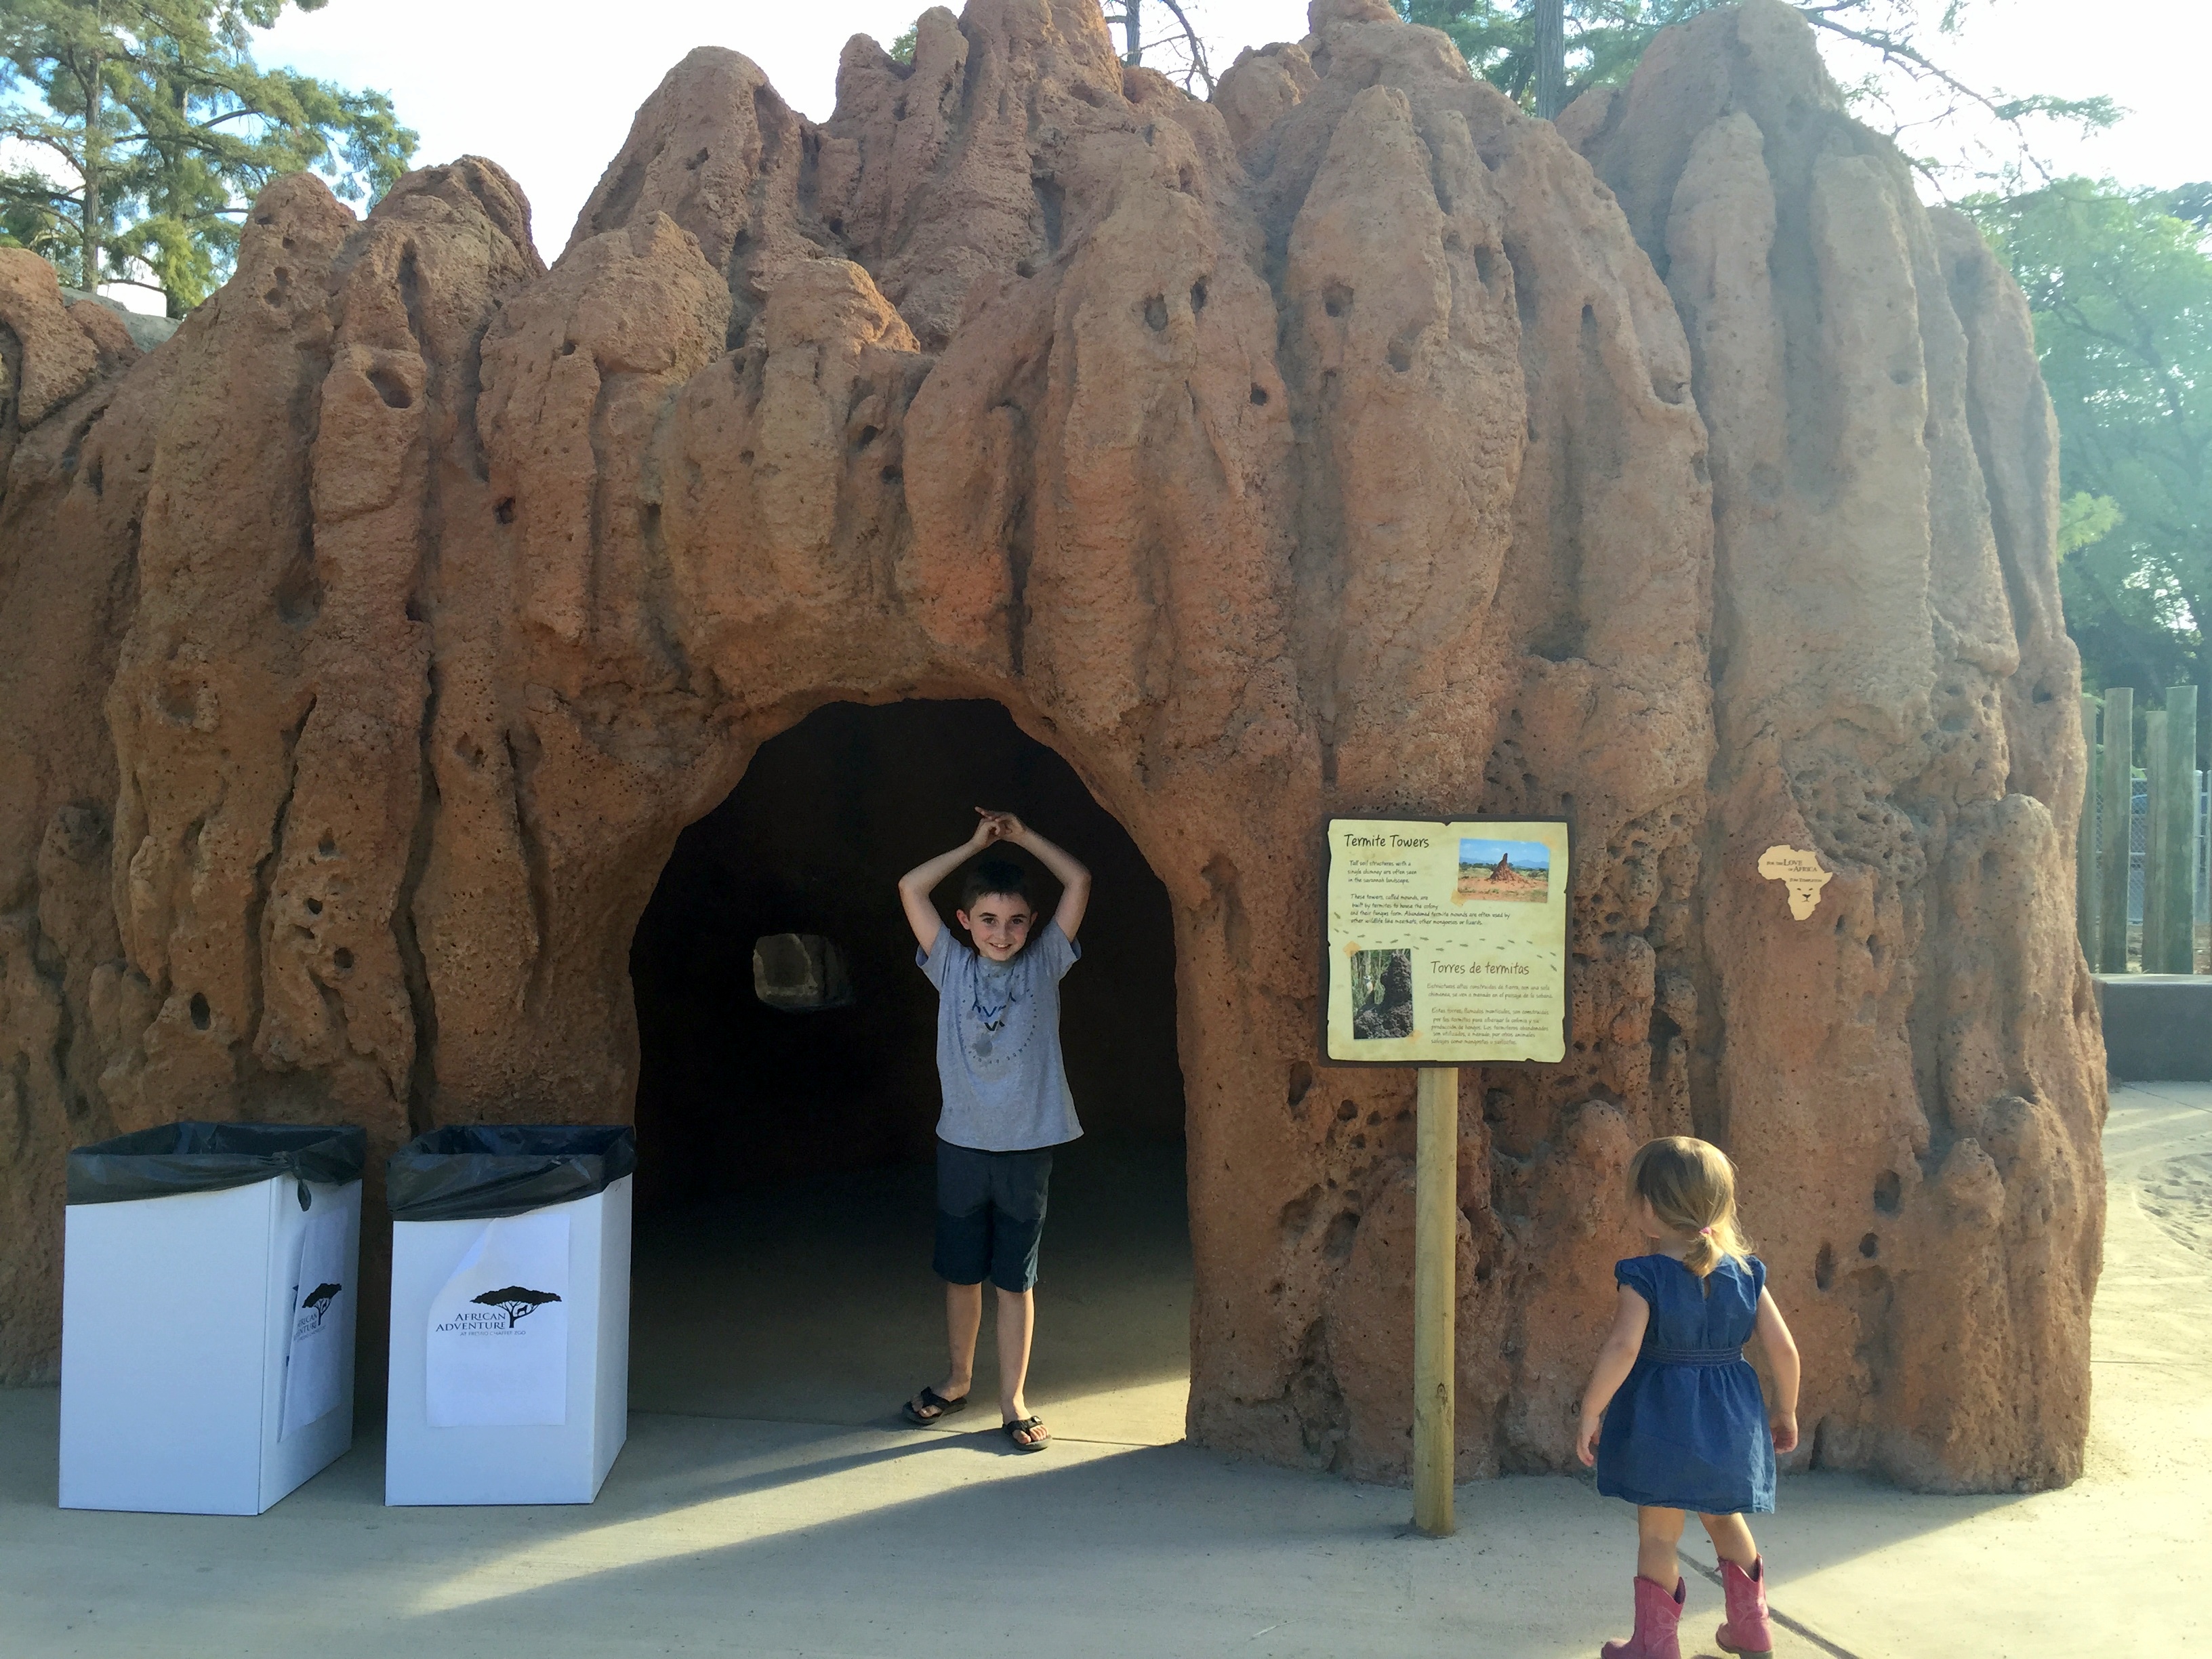 Interactive children's exhibits allow kids to experience what it might be like to live in a termite home or be a meerkat.